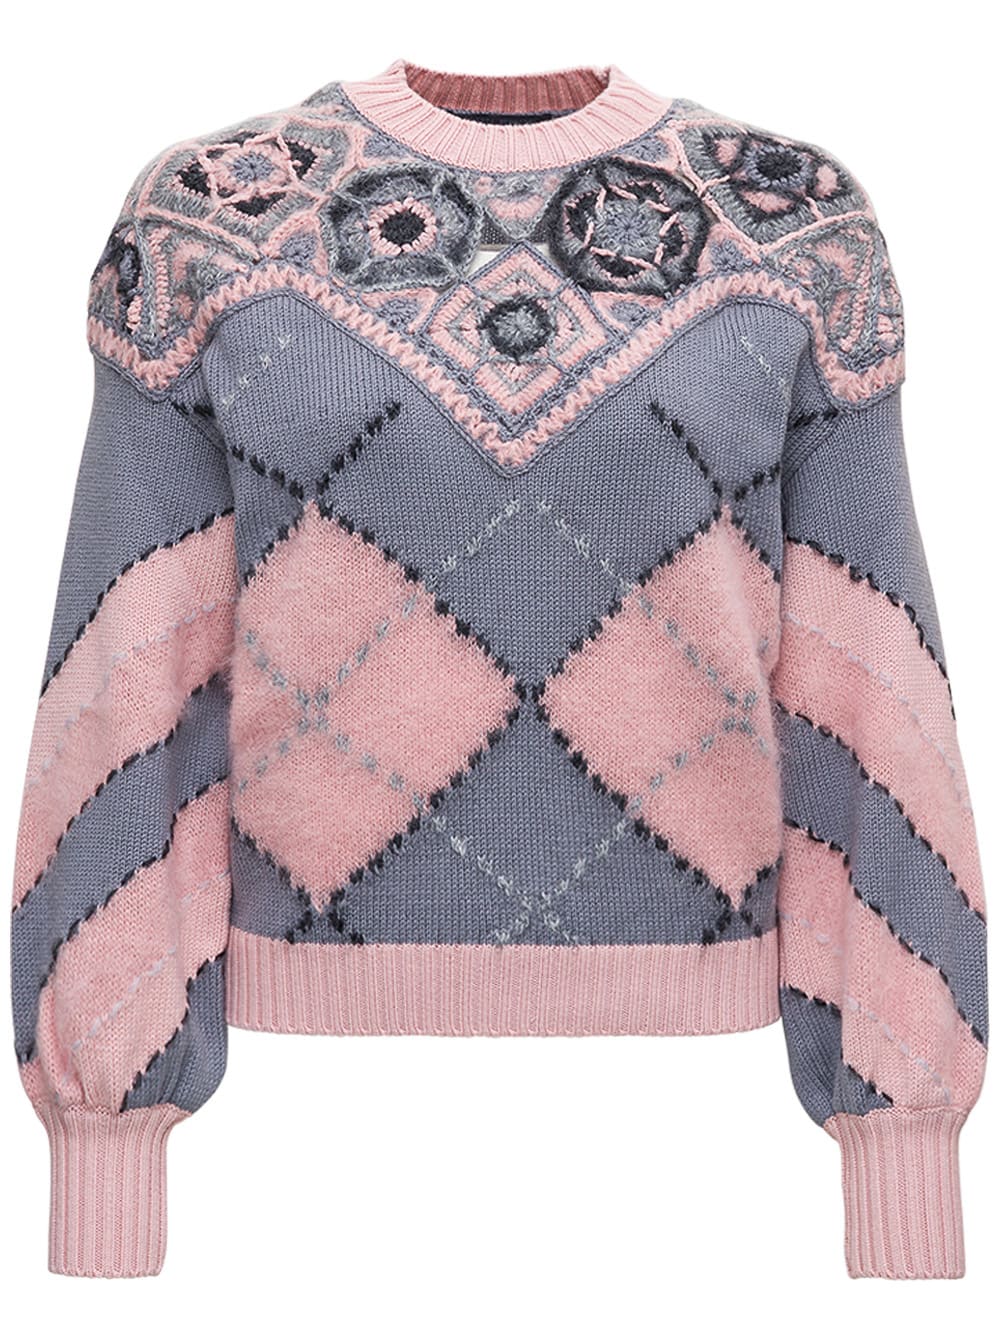 Alberta Ferretti Grey And Pink Wool Sweater With Openwork Details